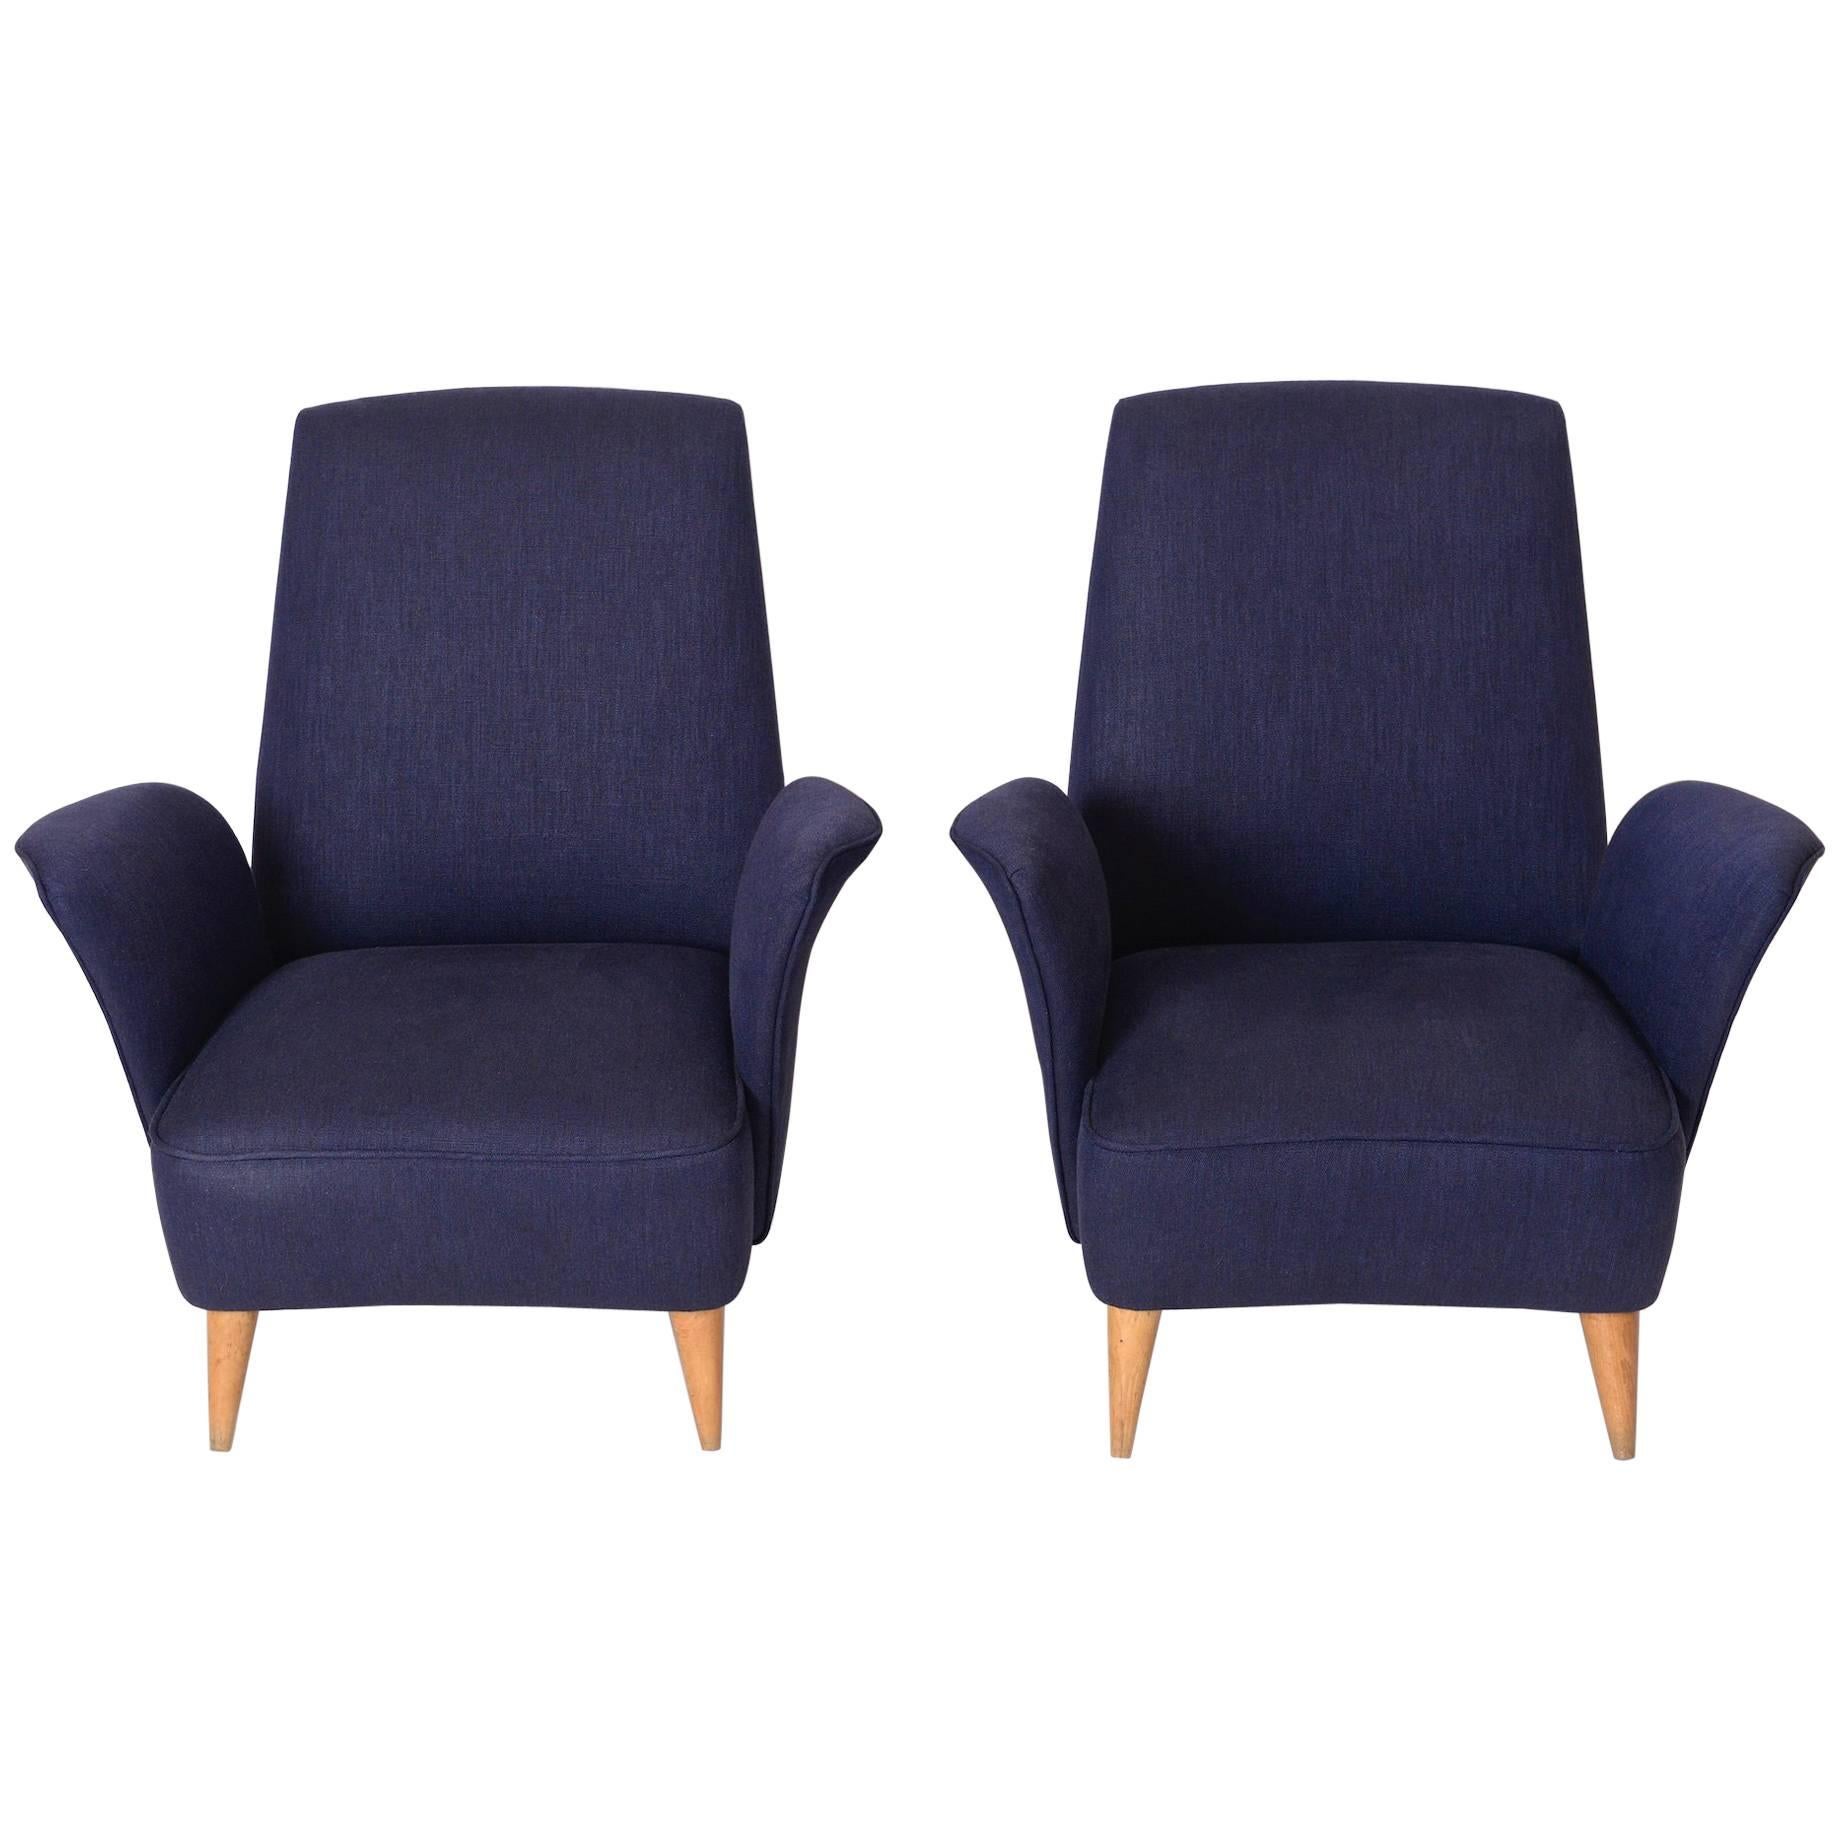 Pair of Mid-Century Italian Lounge Chairs in the Manner of Nino Zoncada, c.1950